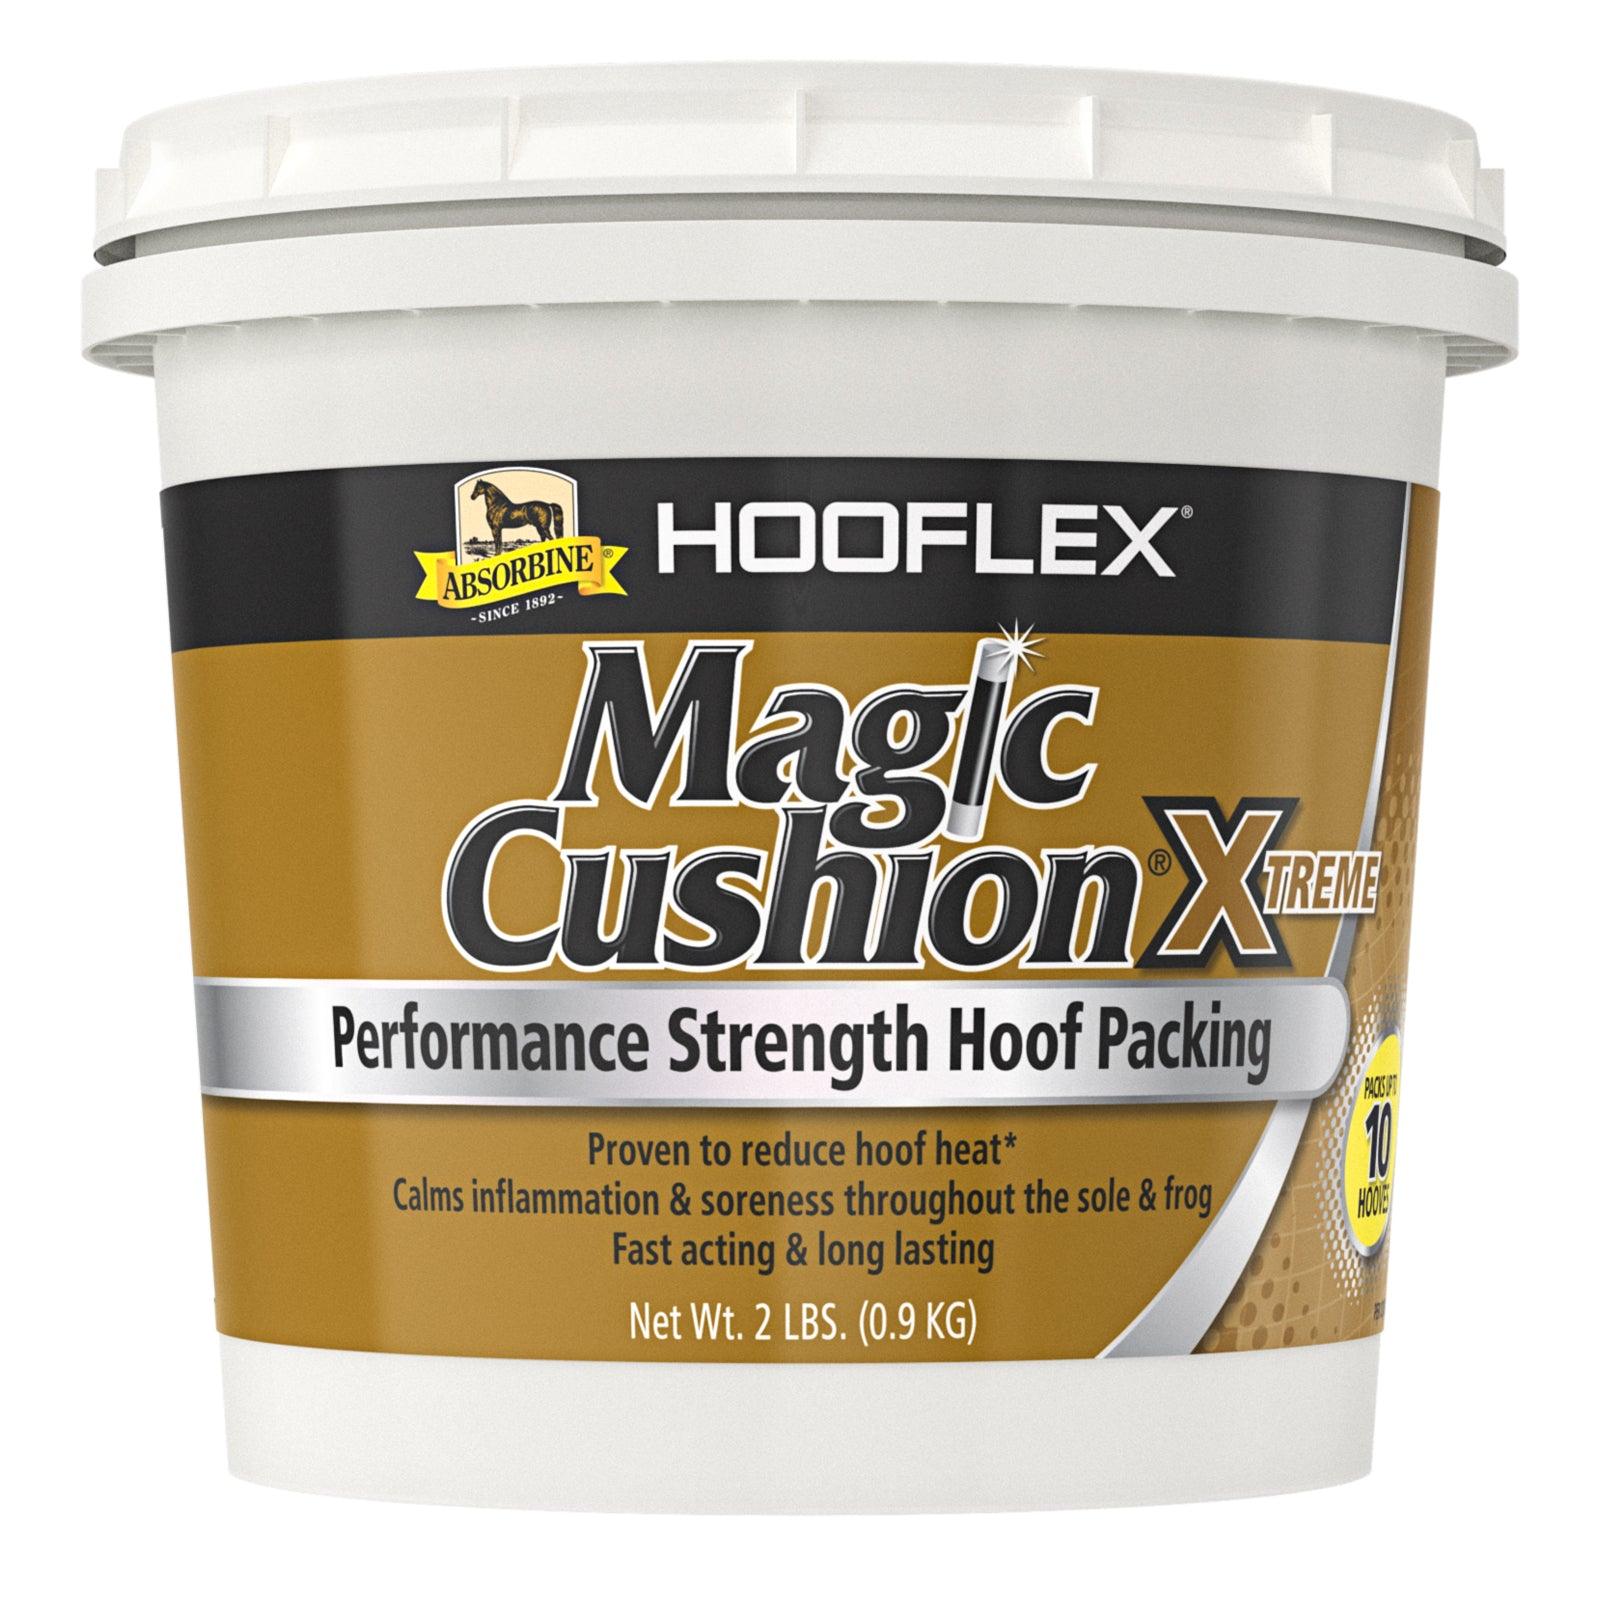 Magic Cushion Xtreme Performance Strength Hoof Packing. Proven to reduce hoof heat. Calms inflammation & soreness throughout the sole & frog. Fast acting, long lasting. Net weight 2 pound bucket.